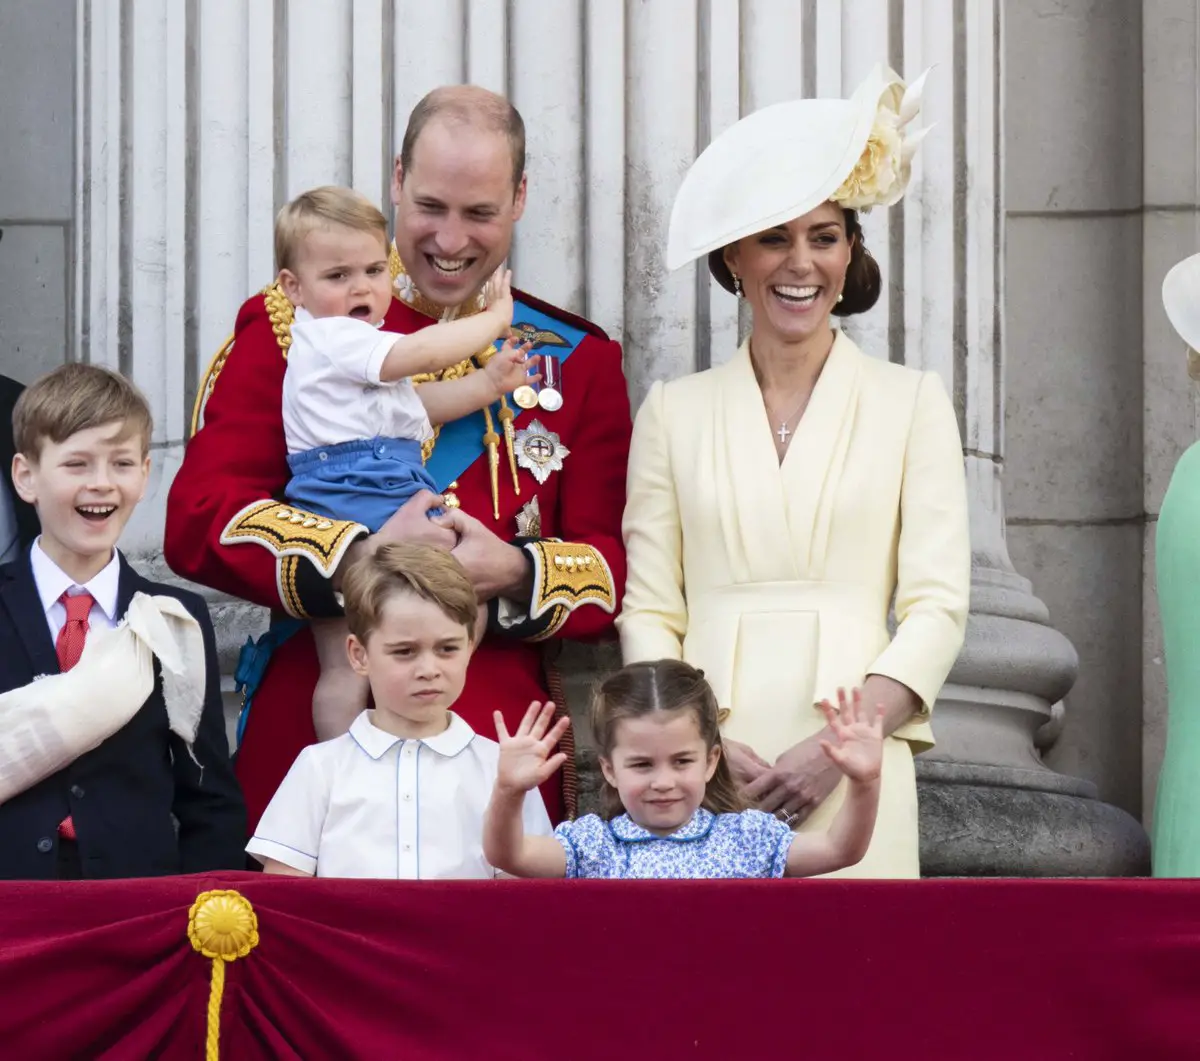 Prince Louis made his debut appearance at Trooping the Colour with Duke and duchess of cambridge